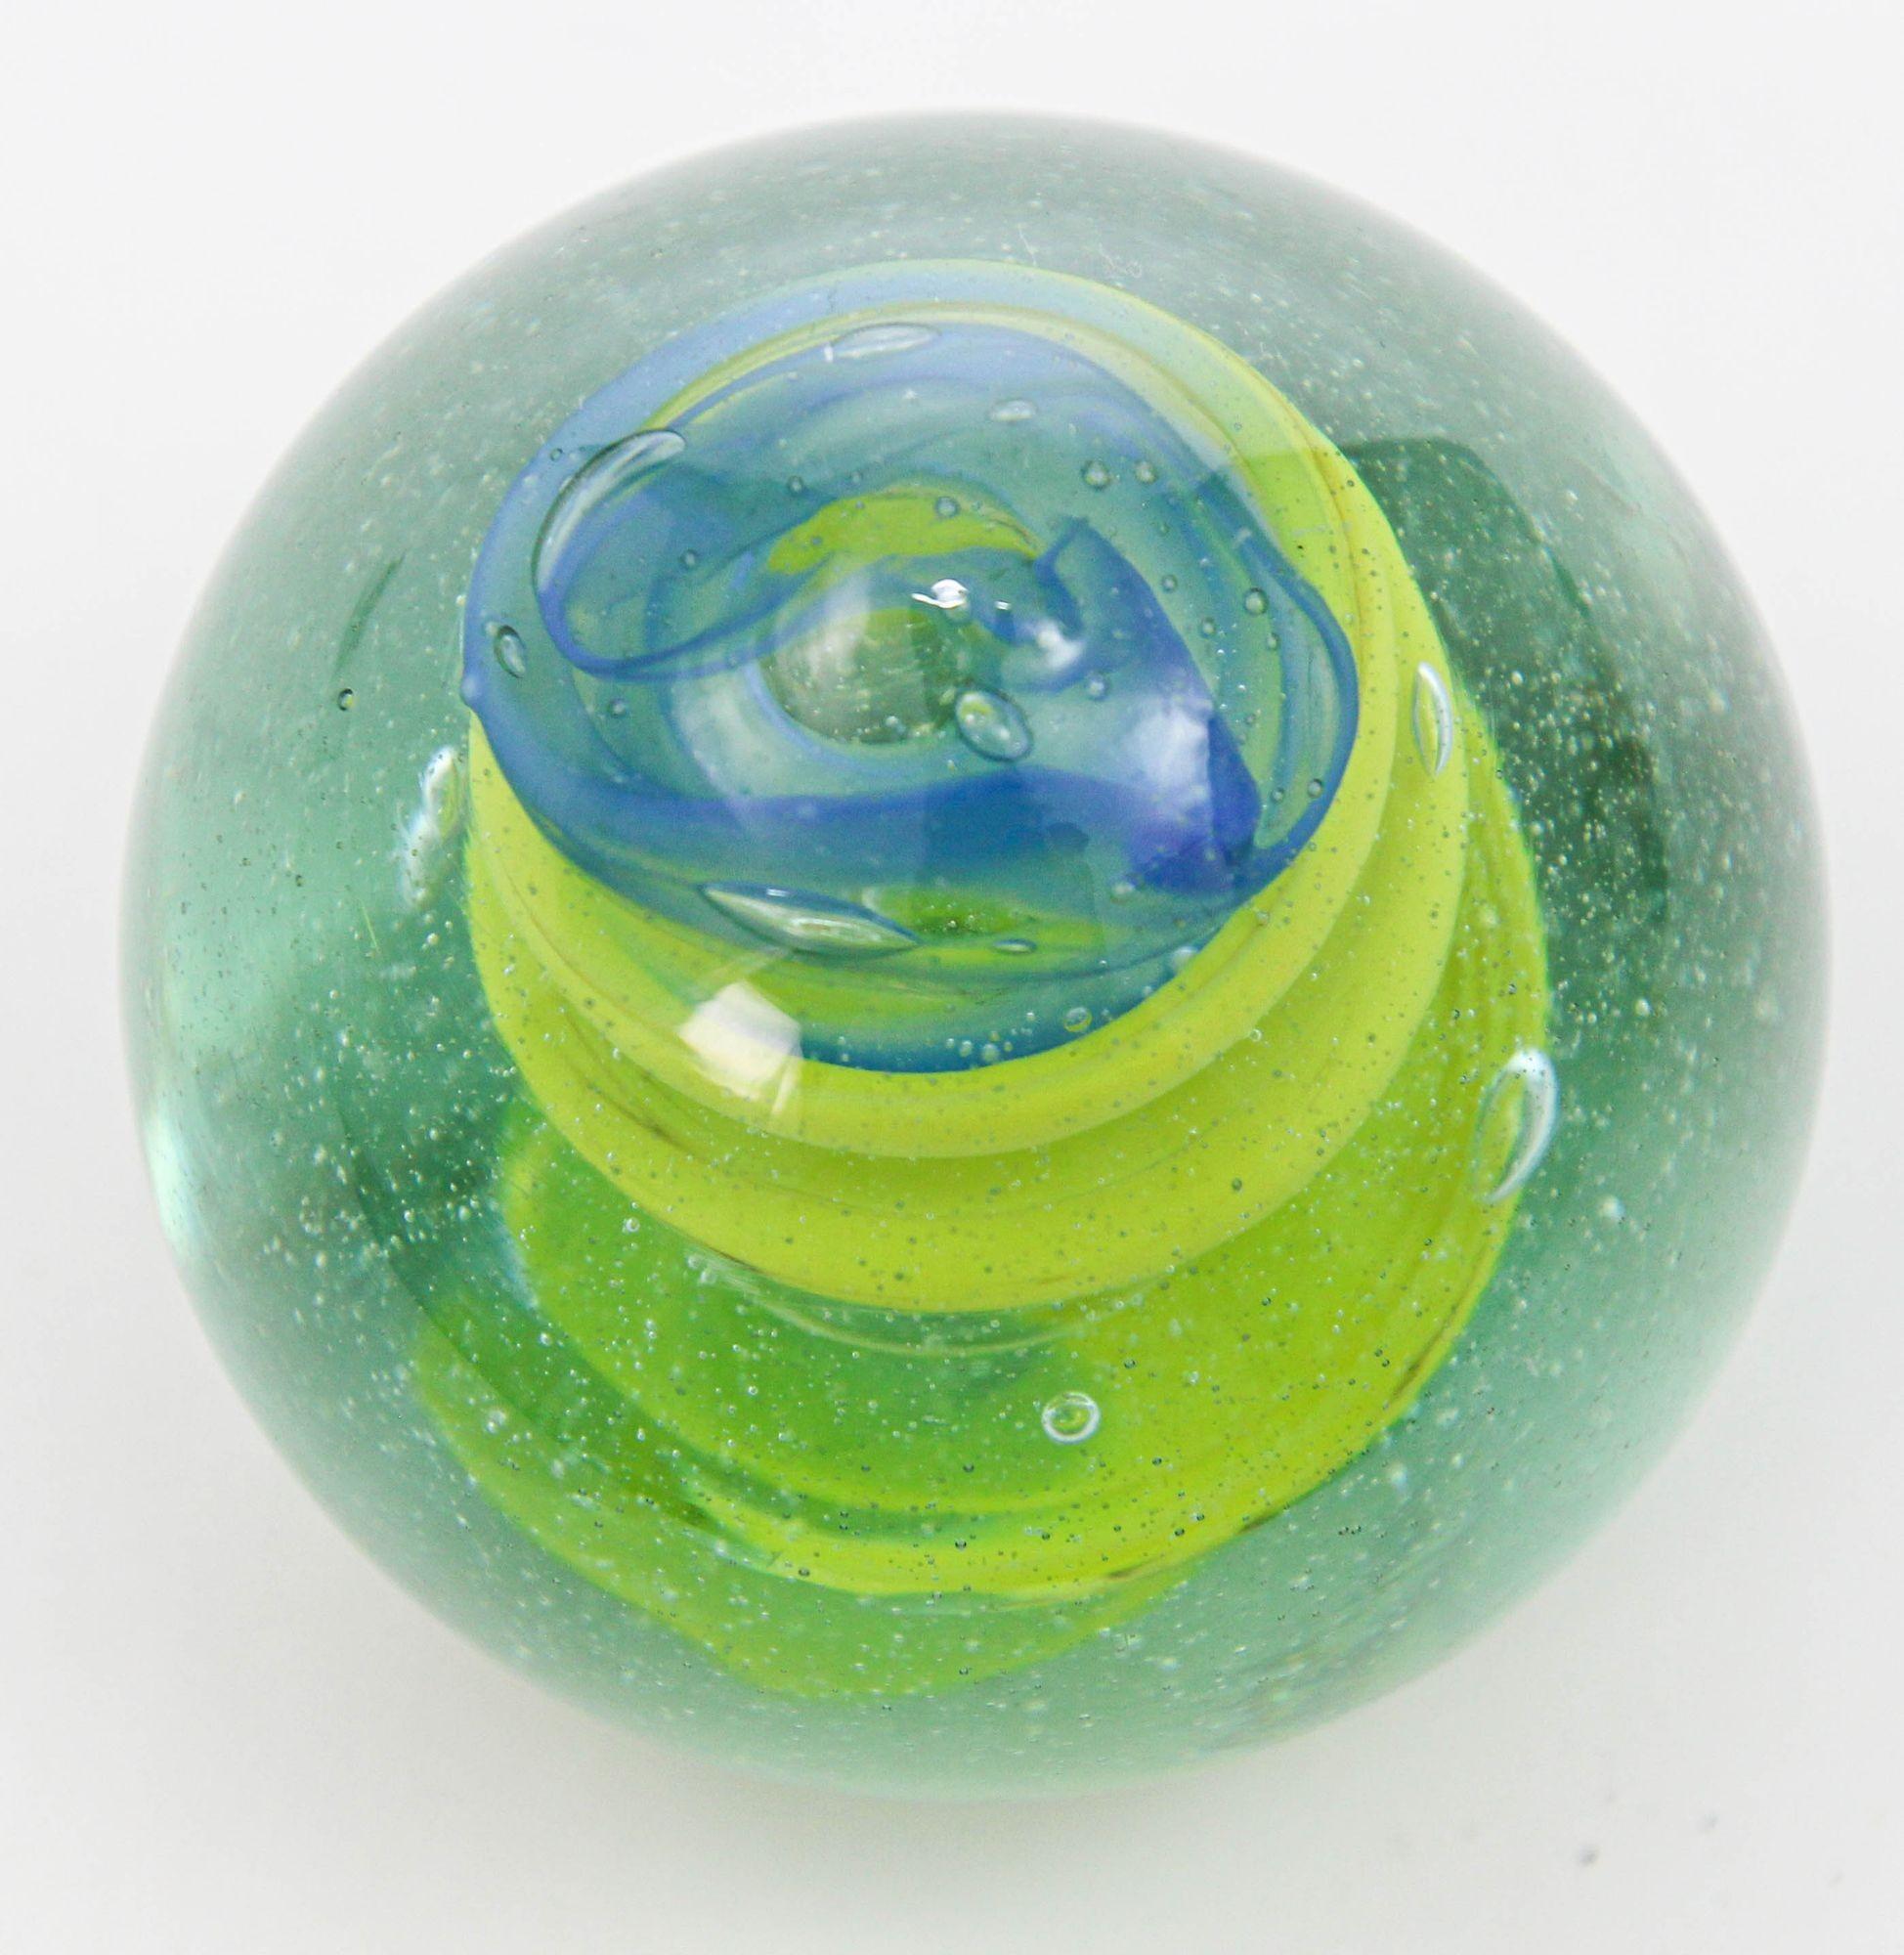 This vintage 1980's glass spiral paperweight or art glass object desk accessory.
Vintage crystal art glass paperweight in blue and green Swirl.
Paper weight for the sophisticated desk lime green spiral and blue sea waves sphere.
A compliment to any